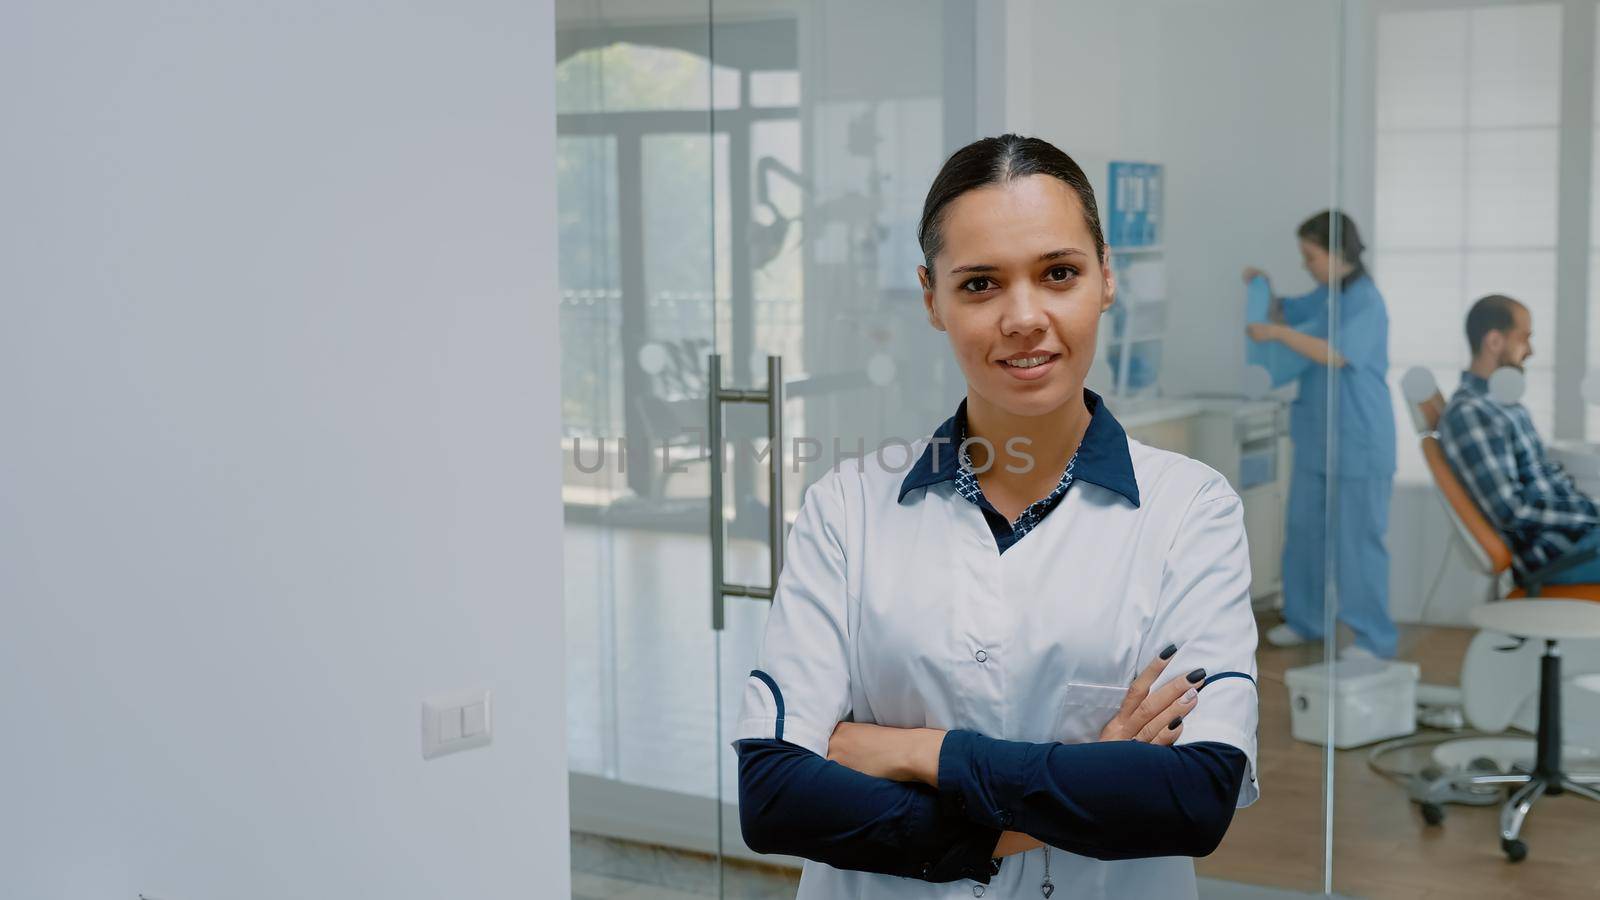 Portrait of caucasian stomatologist in uniform smiling and looking at camera in dental office space. Woman with dentistry expertise and dentist profession standing at oral care clinic